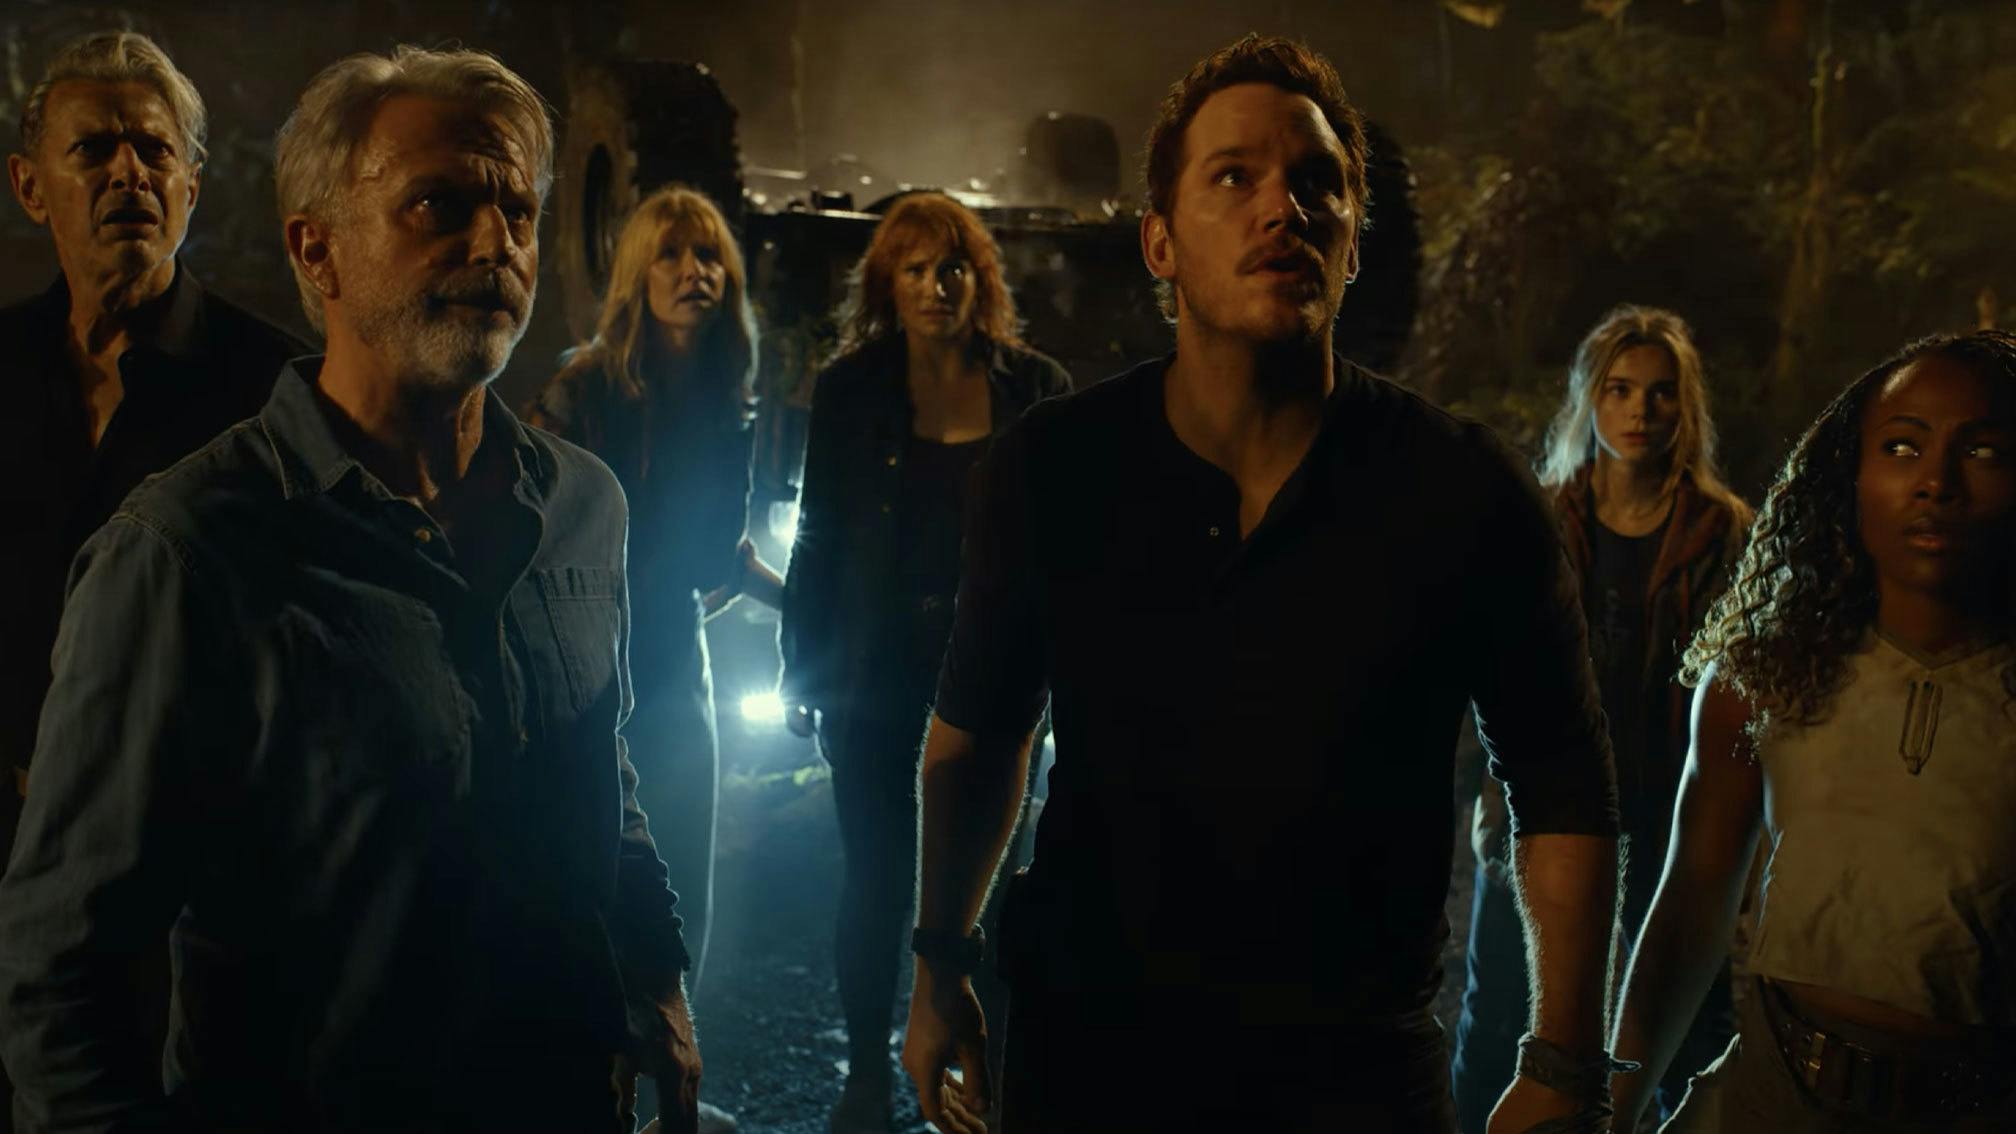 Watch the first official trailer for Jurassic World Dominion